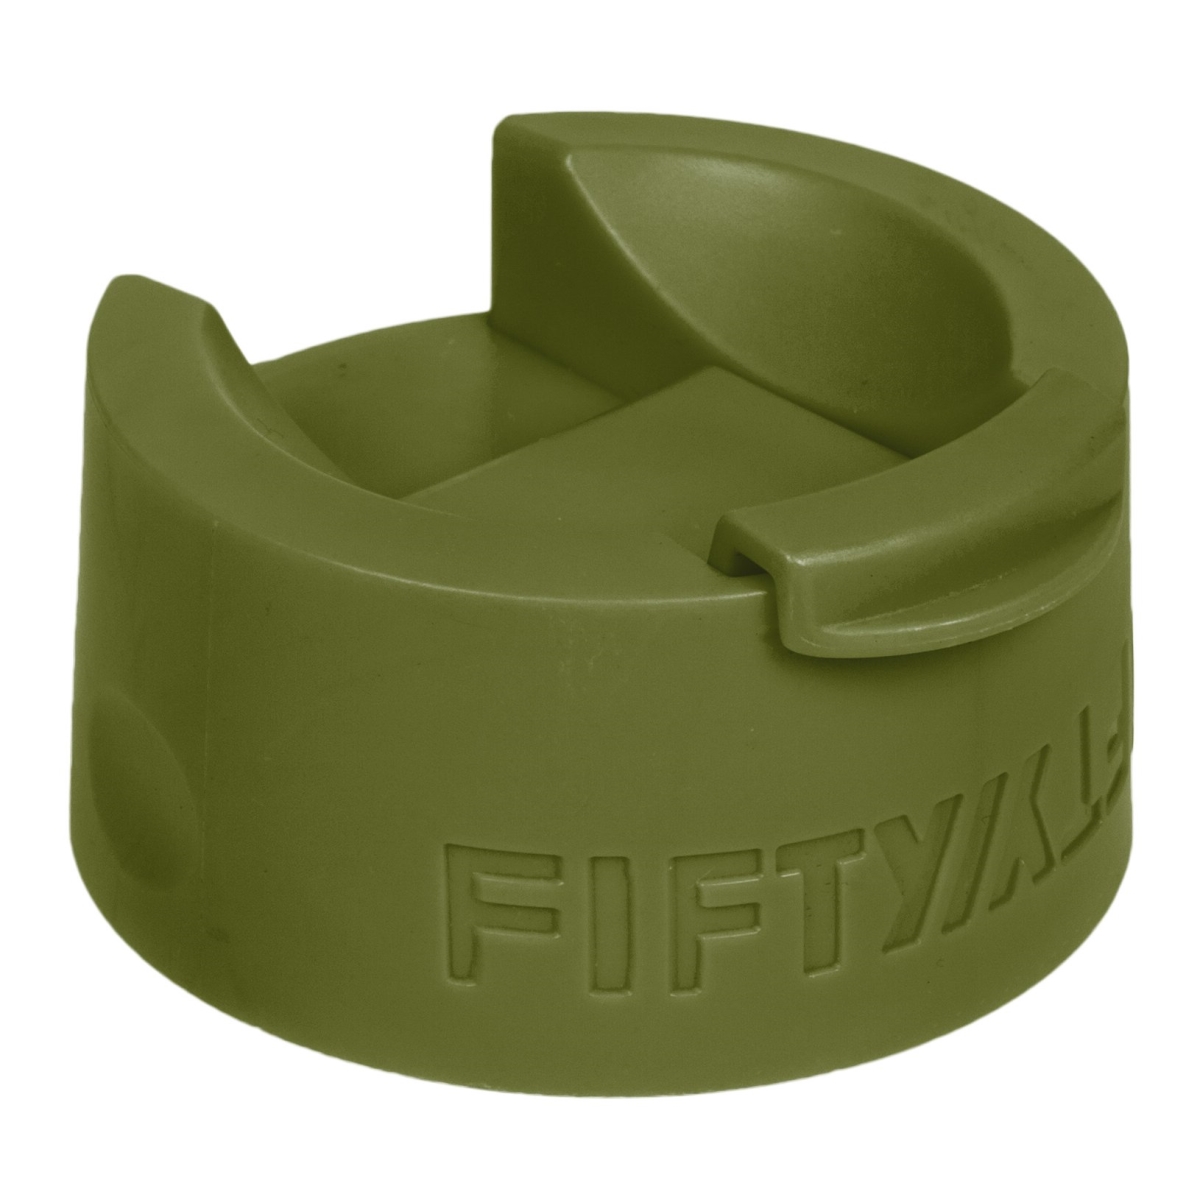 A68003ol0 Fifty & Fifty Wide-mouth Coffee Flip-top Cap, Olive Green